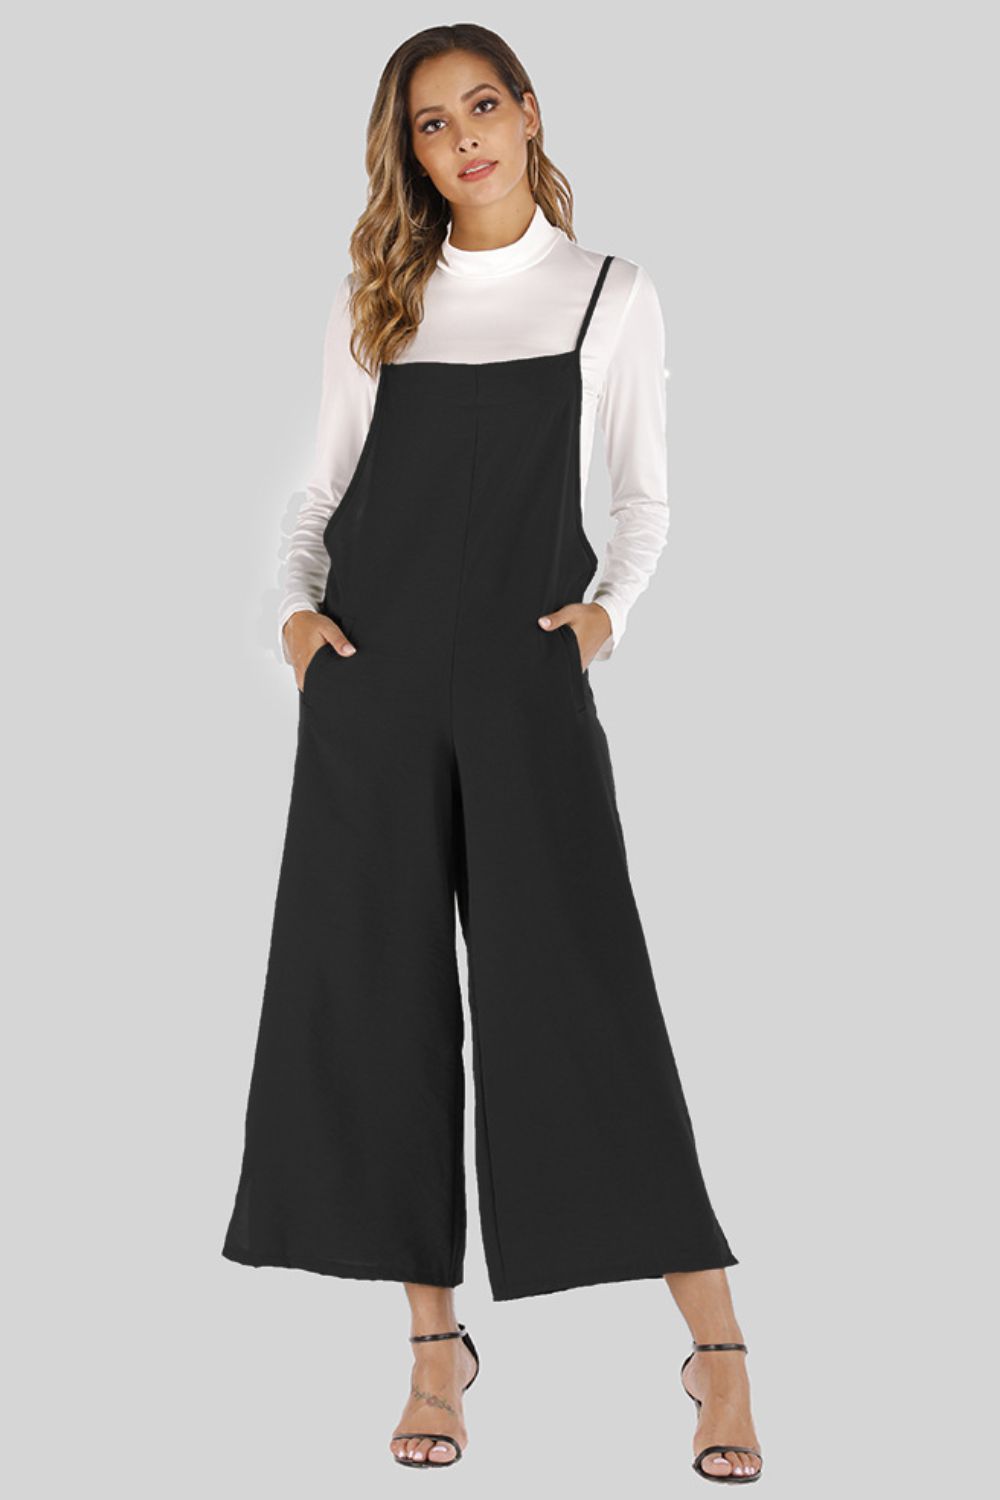 Full Size Cropped Wide Leg Overalls with Pockets - Black / S - Bottoms - Overalls - 1 - 2024